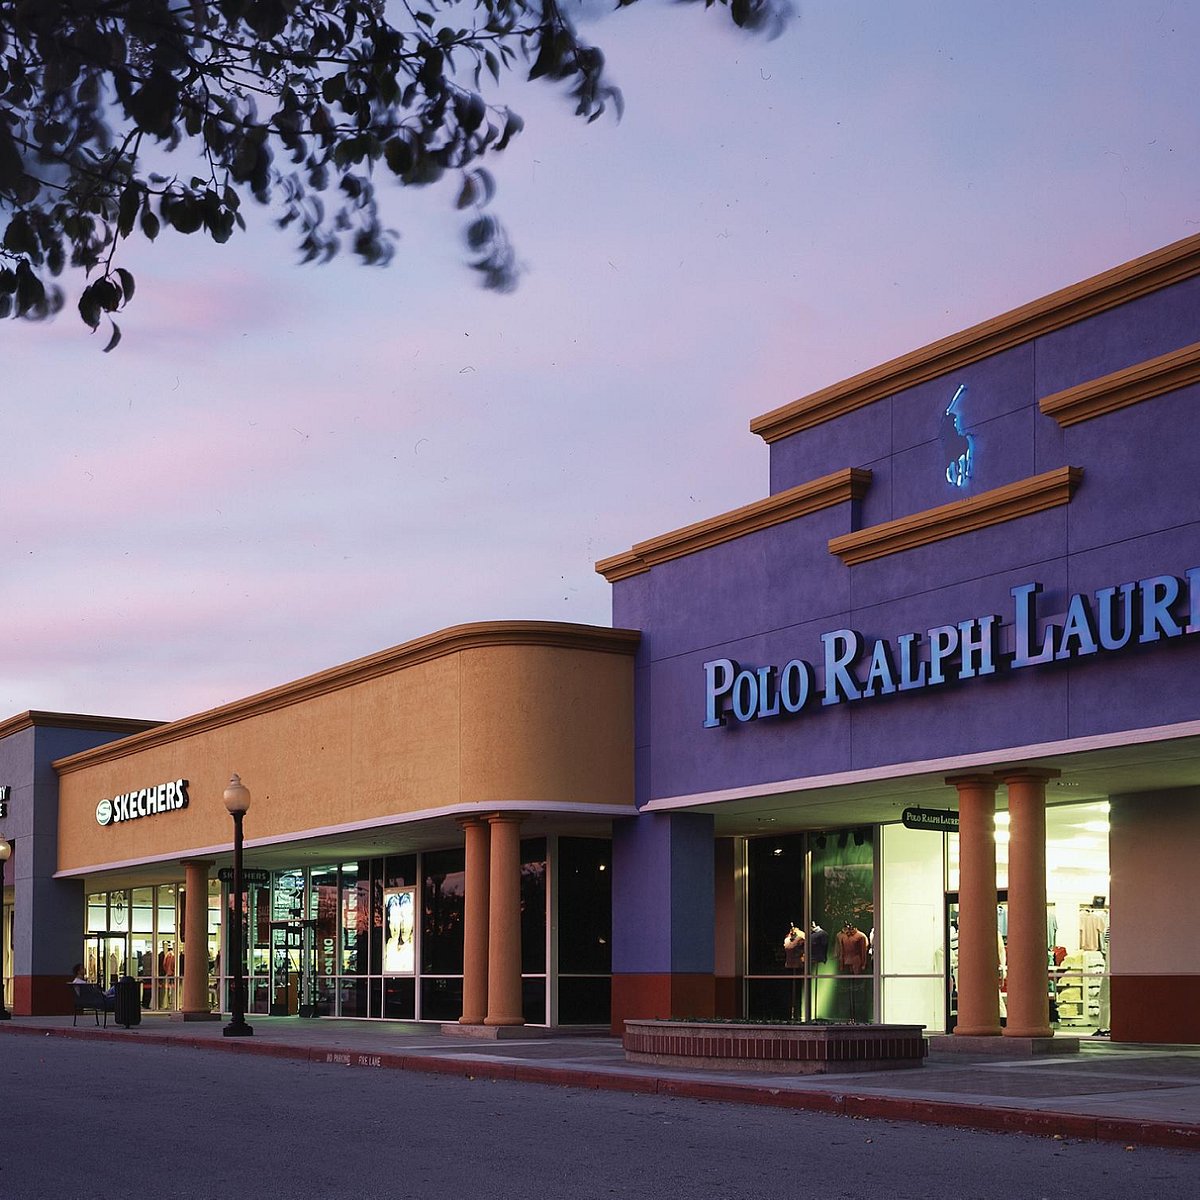 Polo Ralph Lauren Factory Store – The Factory Outlets of Lake